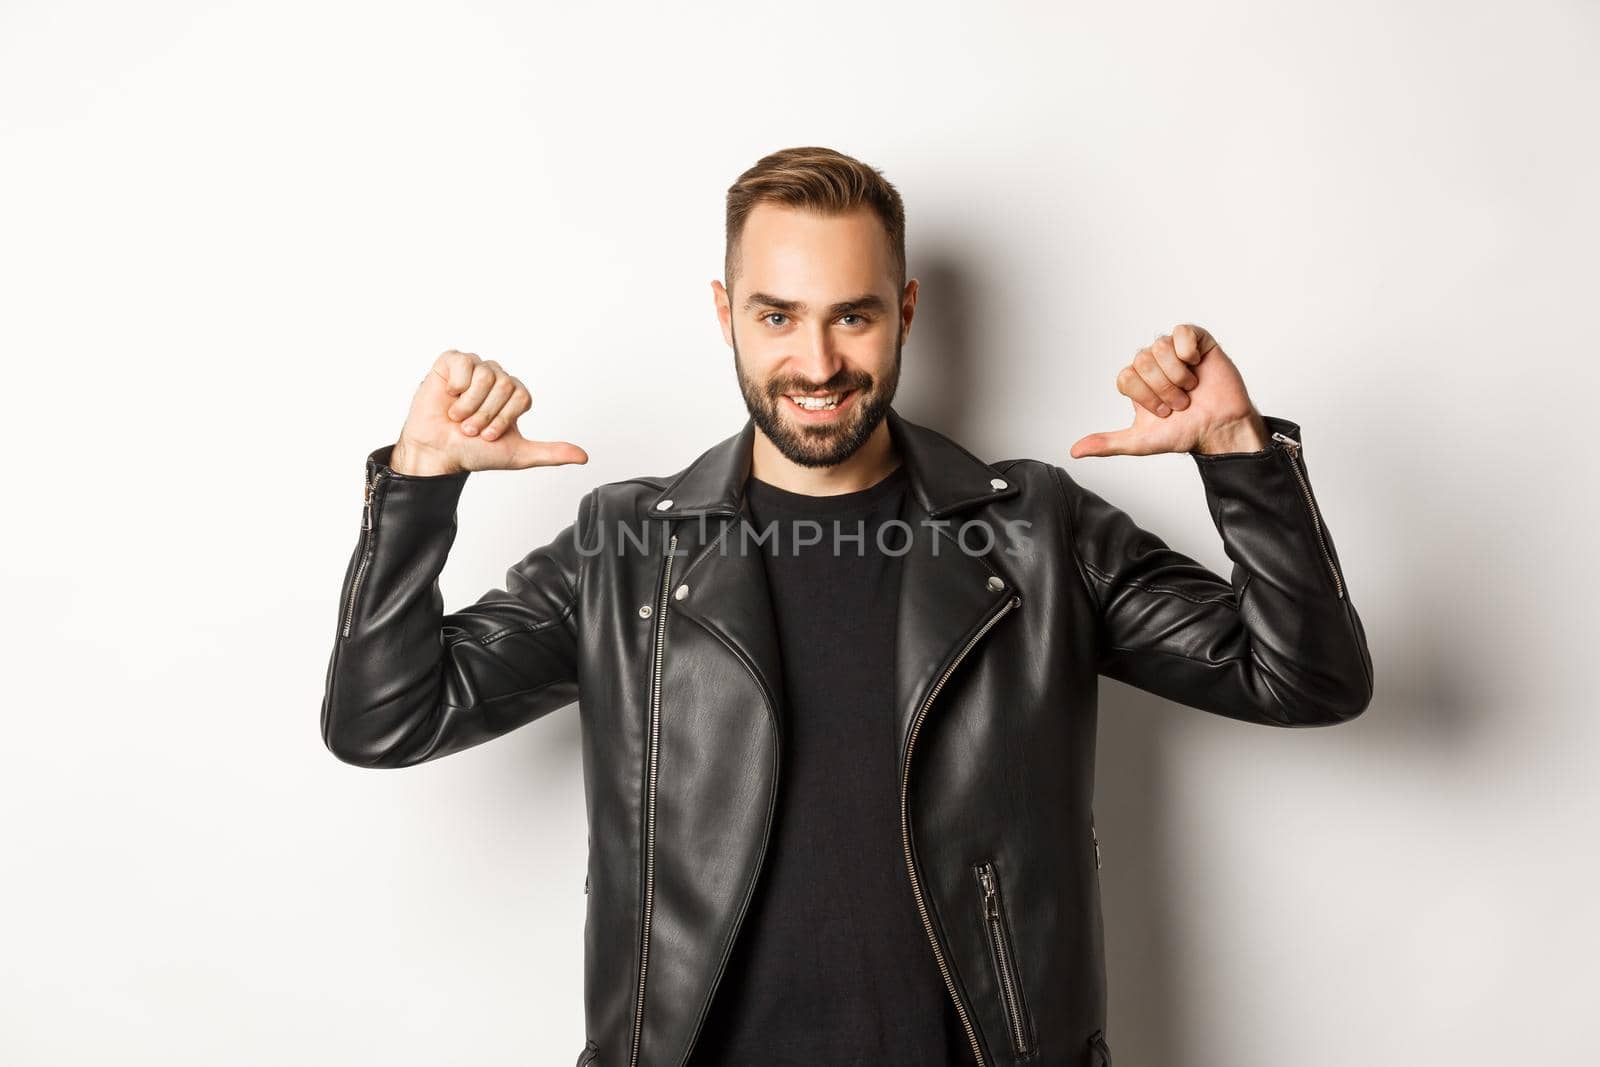 Confident handsome man wearing black leather jacket, pointing at himself and smiling self-assured, standing against white background.